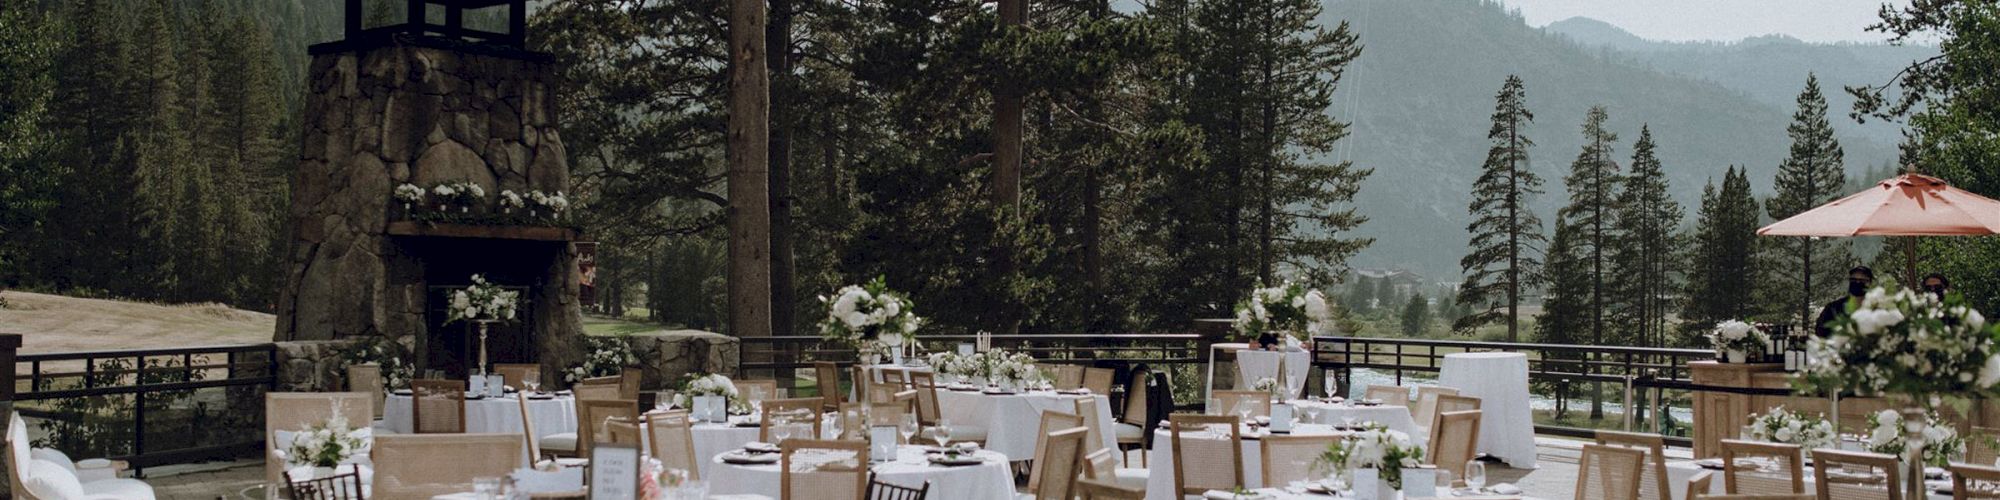 An outdoor event setup with round tables and chairs against a mountainous backdrop, decorated for a formal occasion with floral centerpieces.